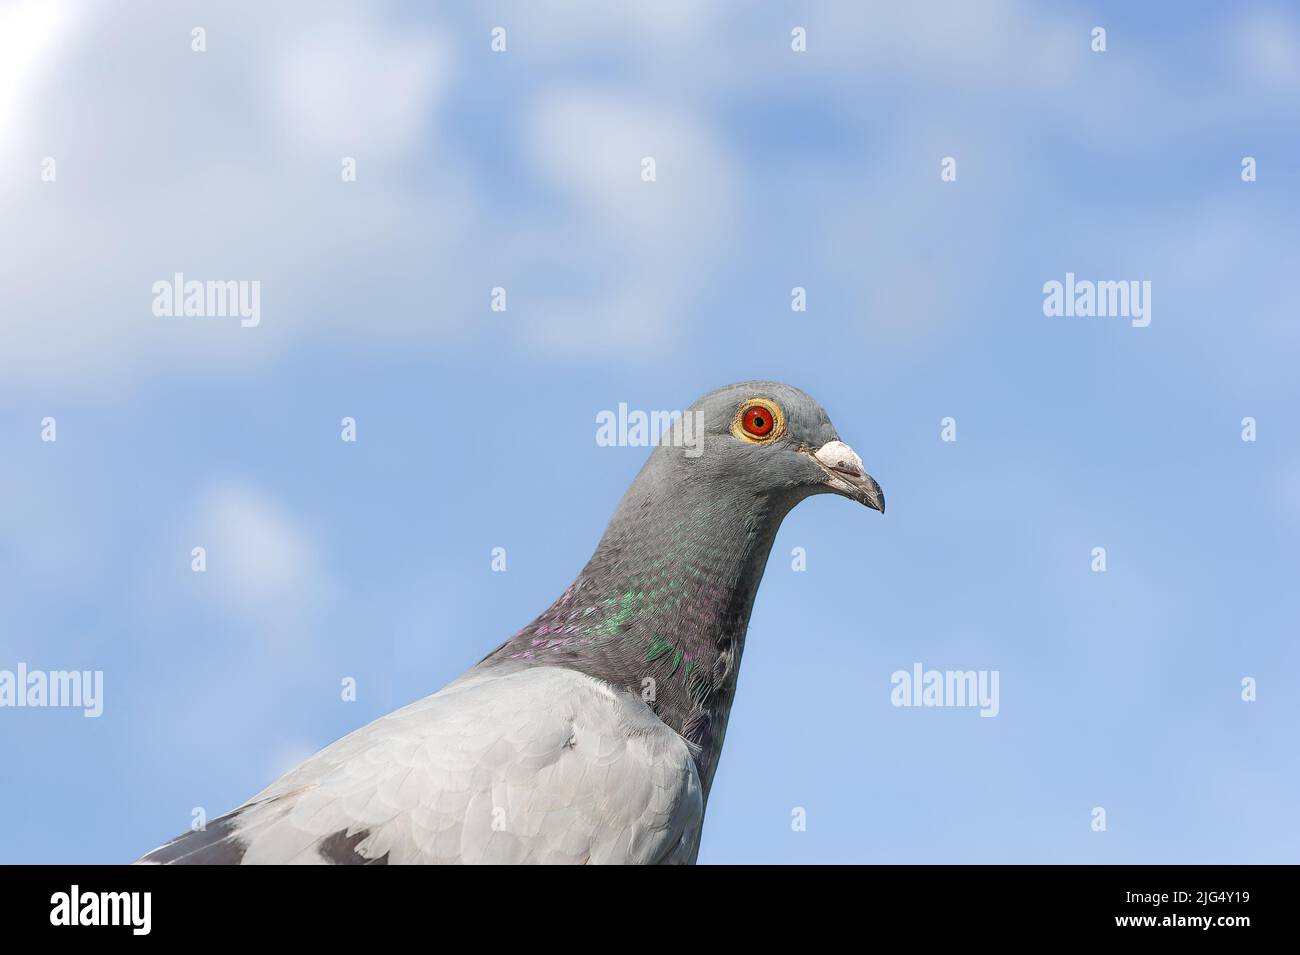 Portrait of a racing or homing pigeon looking into the camera. Stock Photo